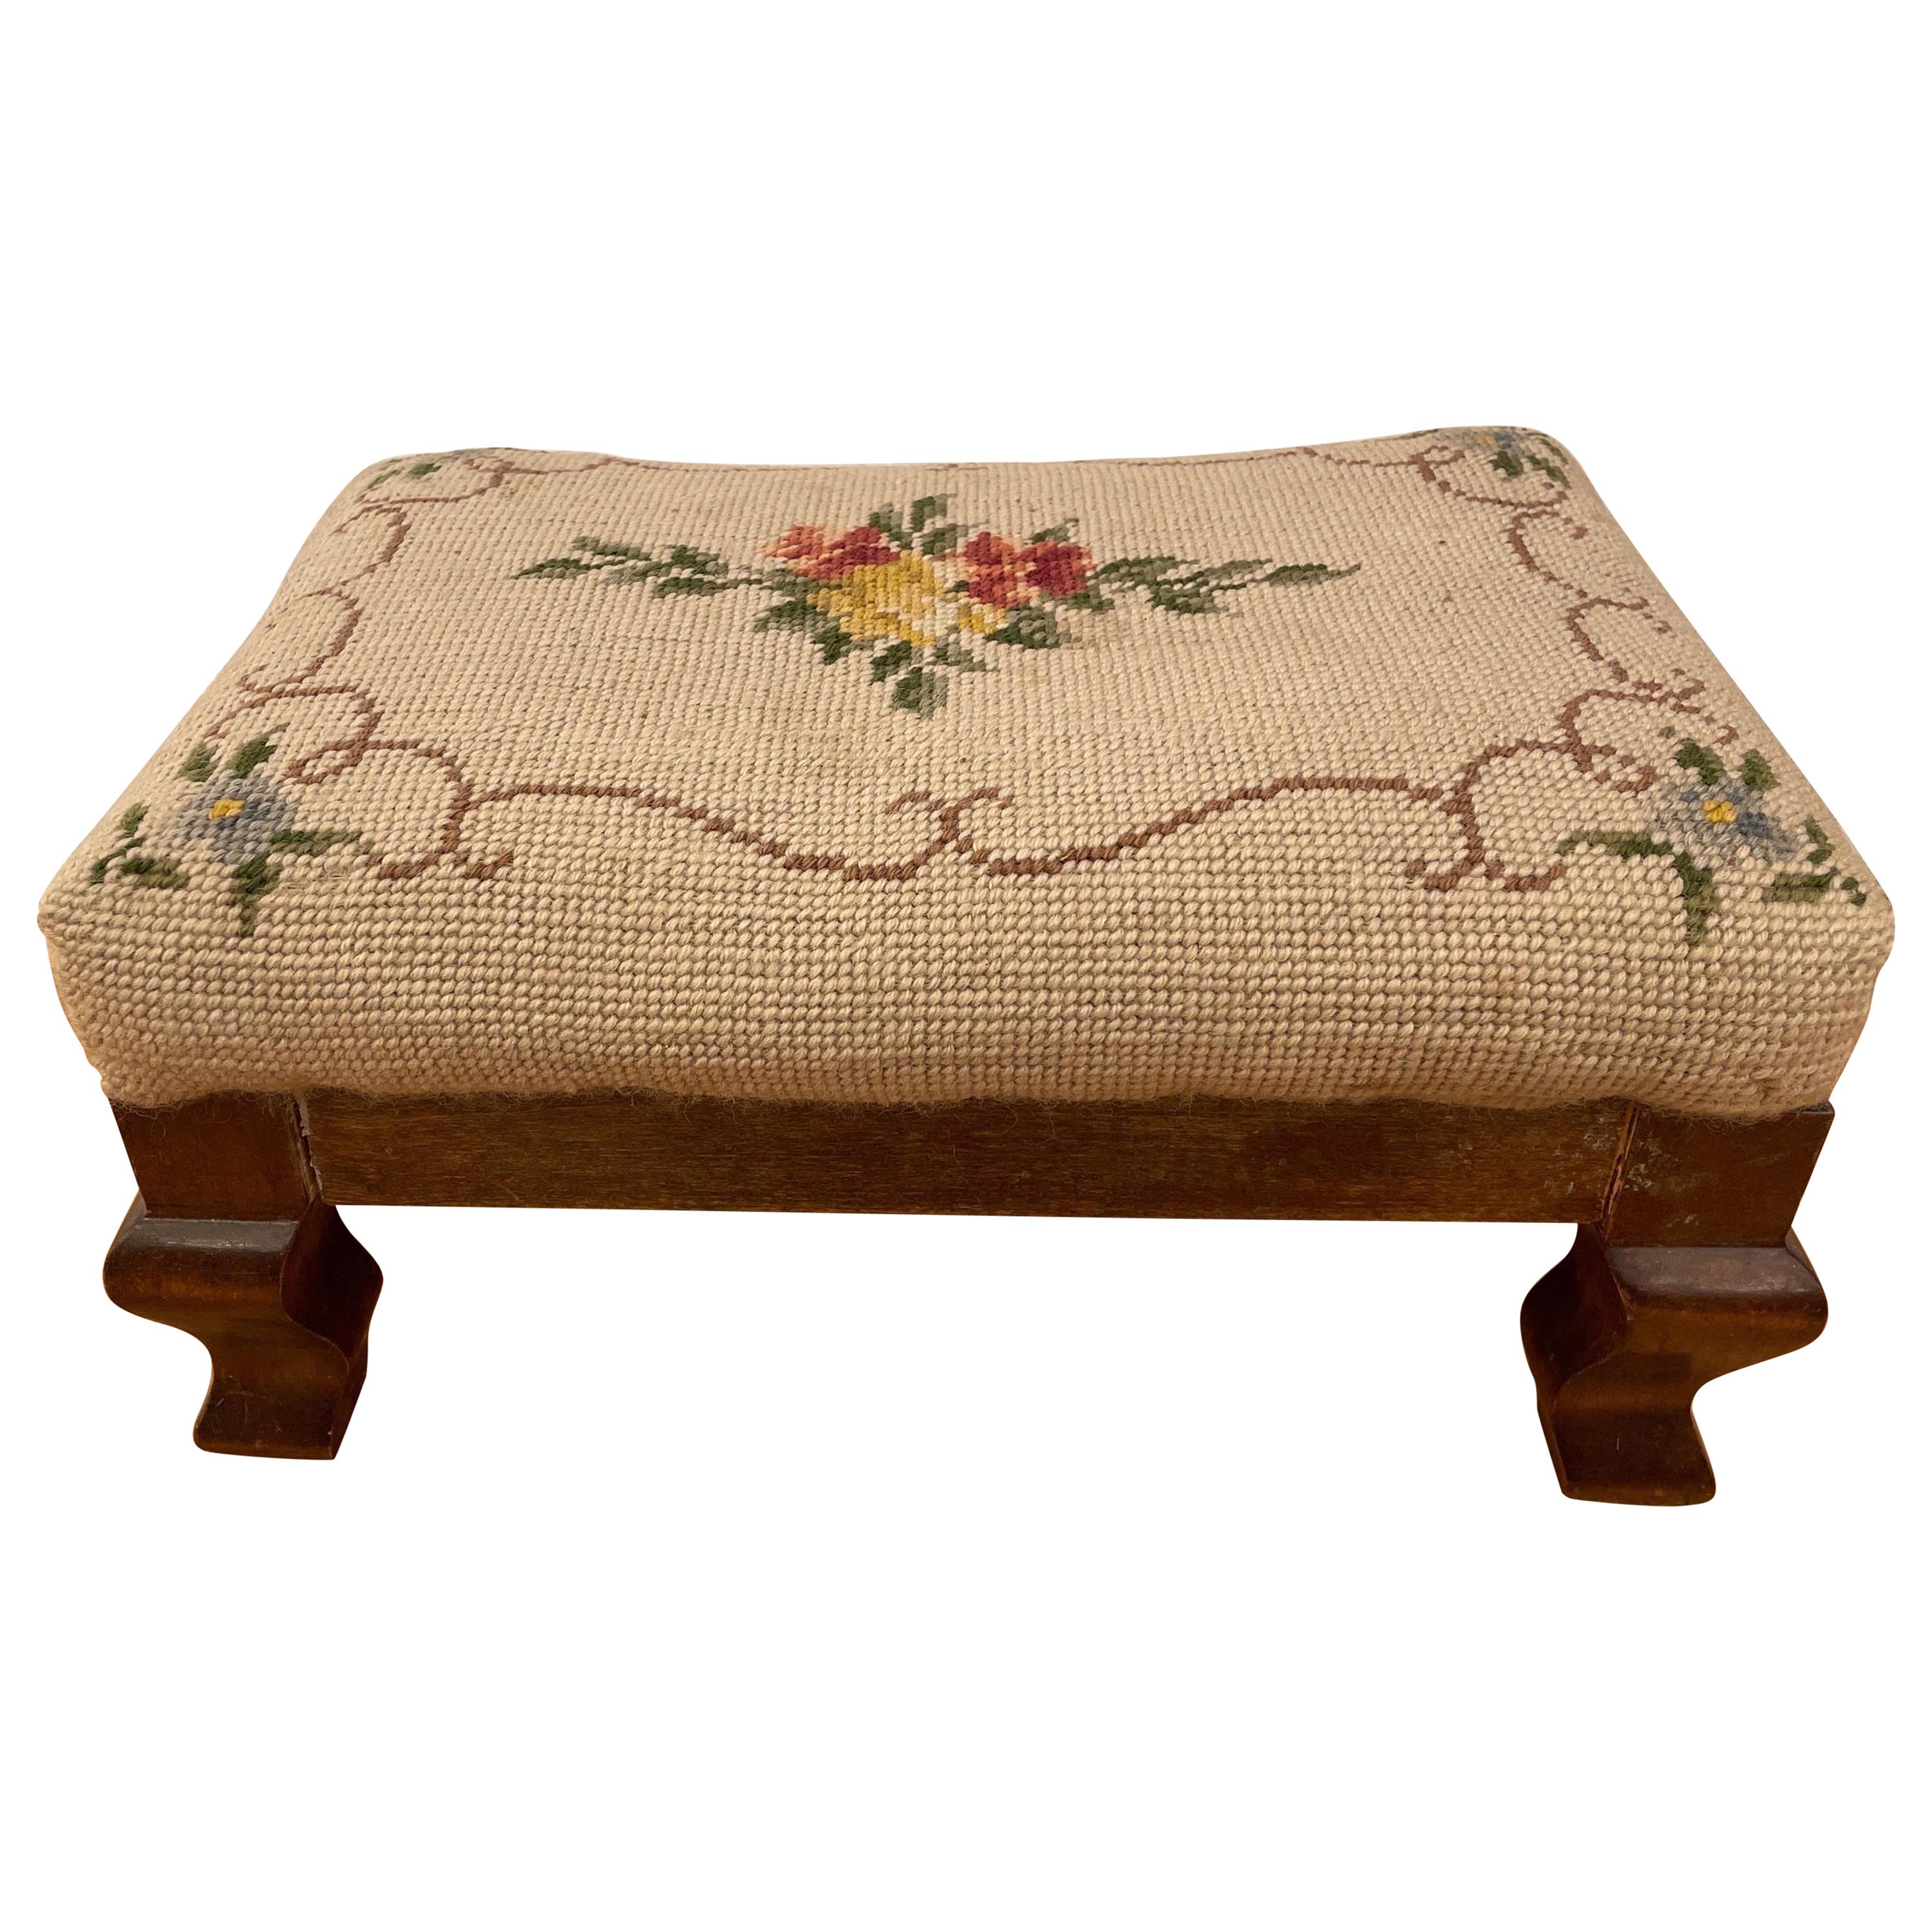 Early 19th Century Embroidered Footrest